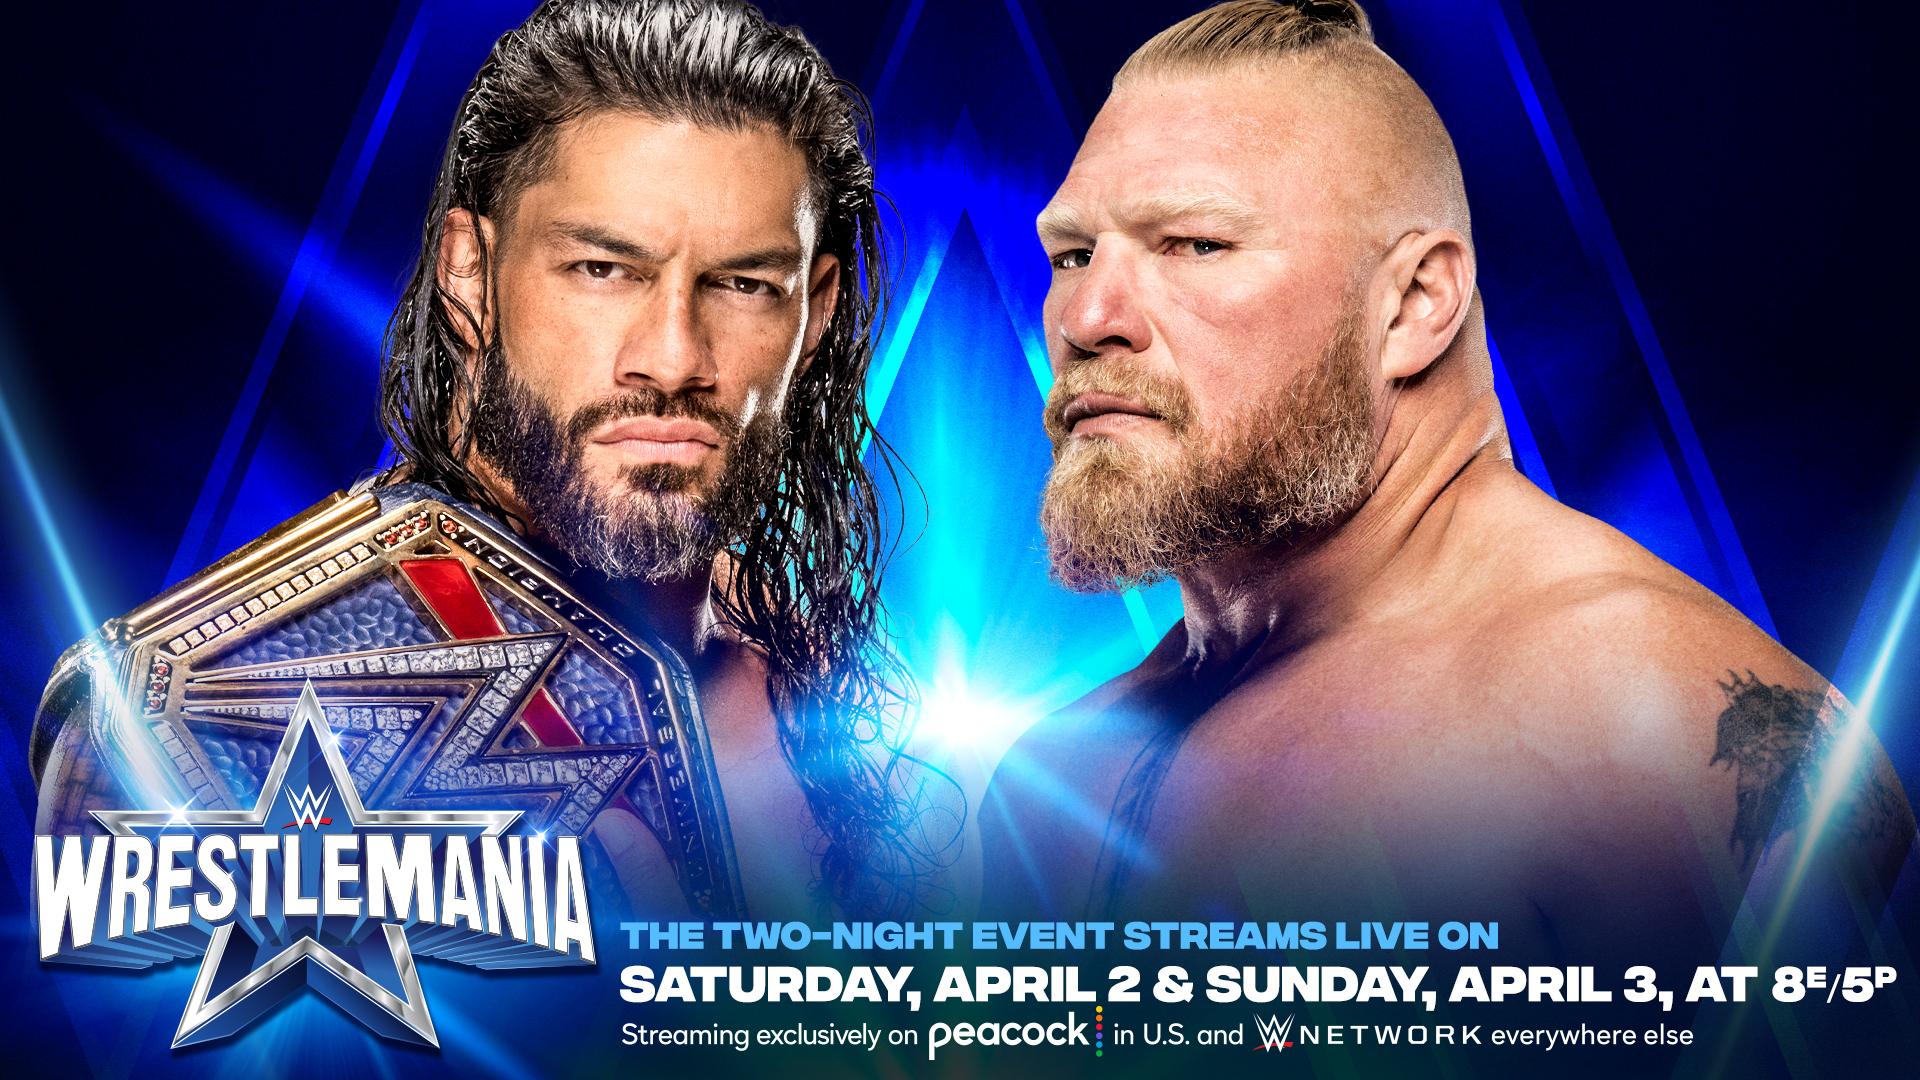 Wrestlemania 2022 Live stream, start time, TV schedule, how to watch